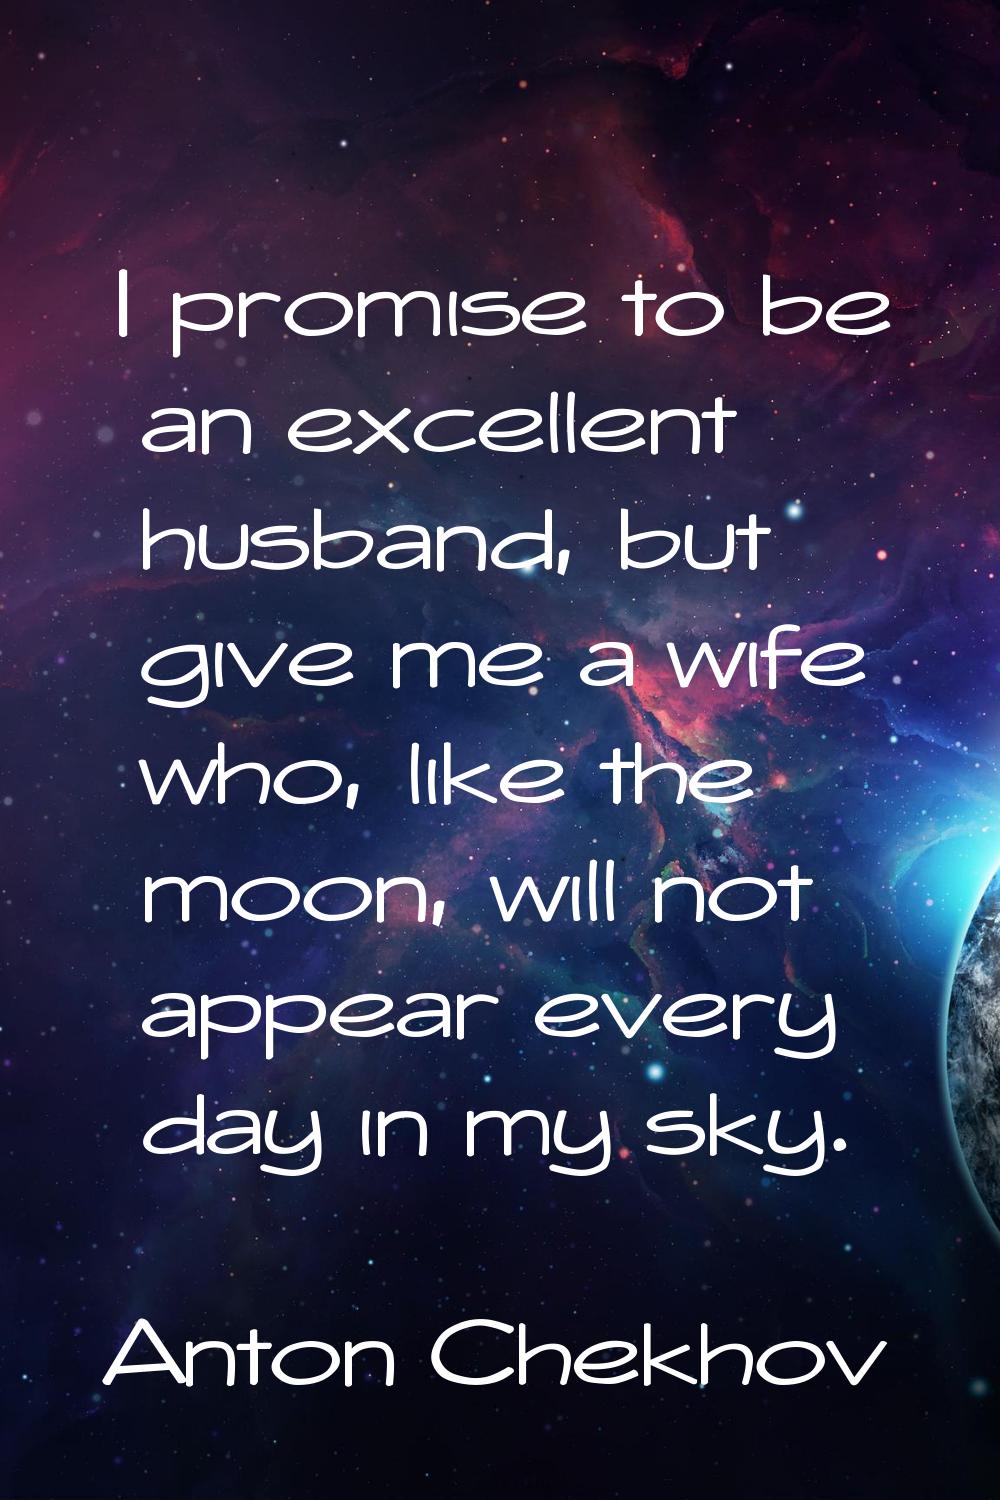 I promise to be an excellent husband, but give me a wife who, like the moon, will not appear every 